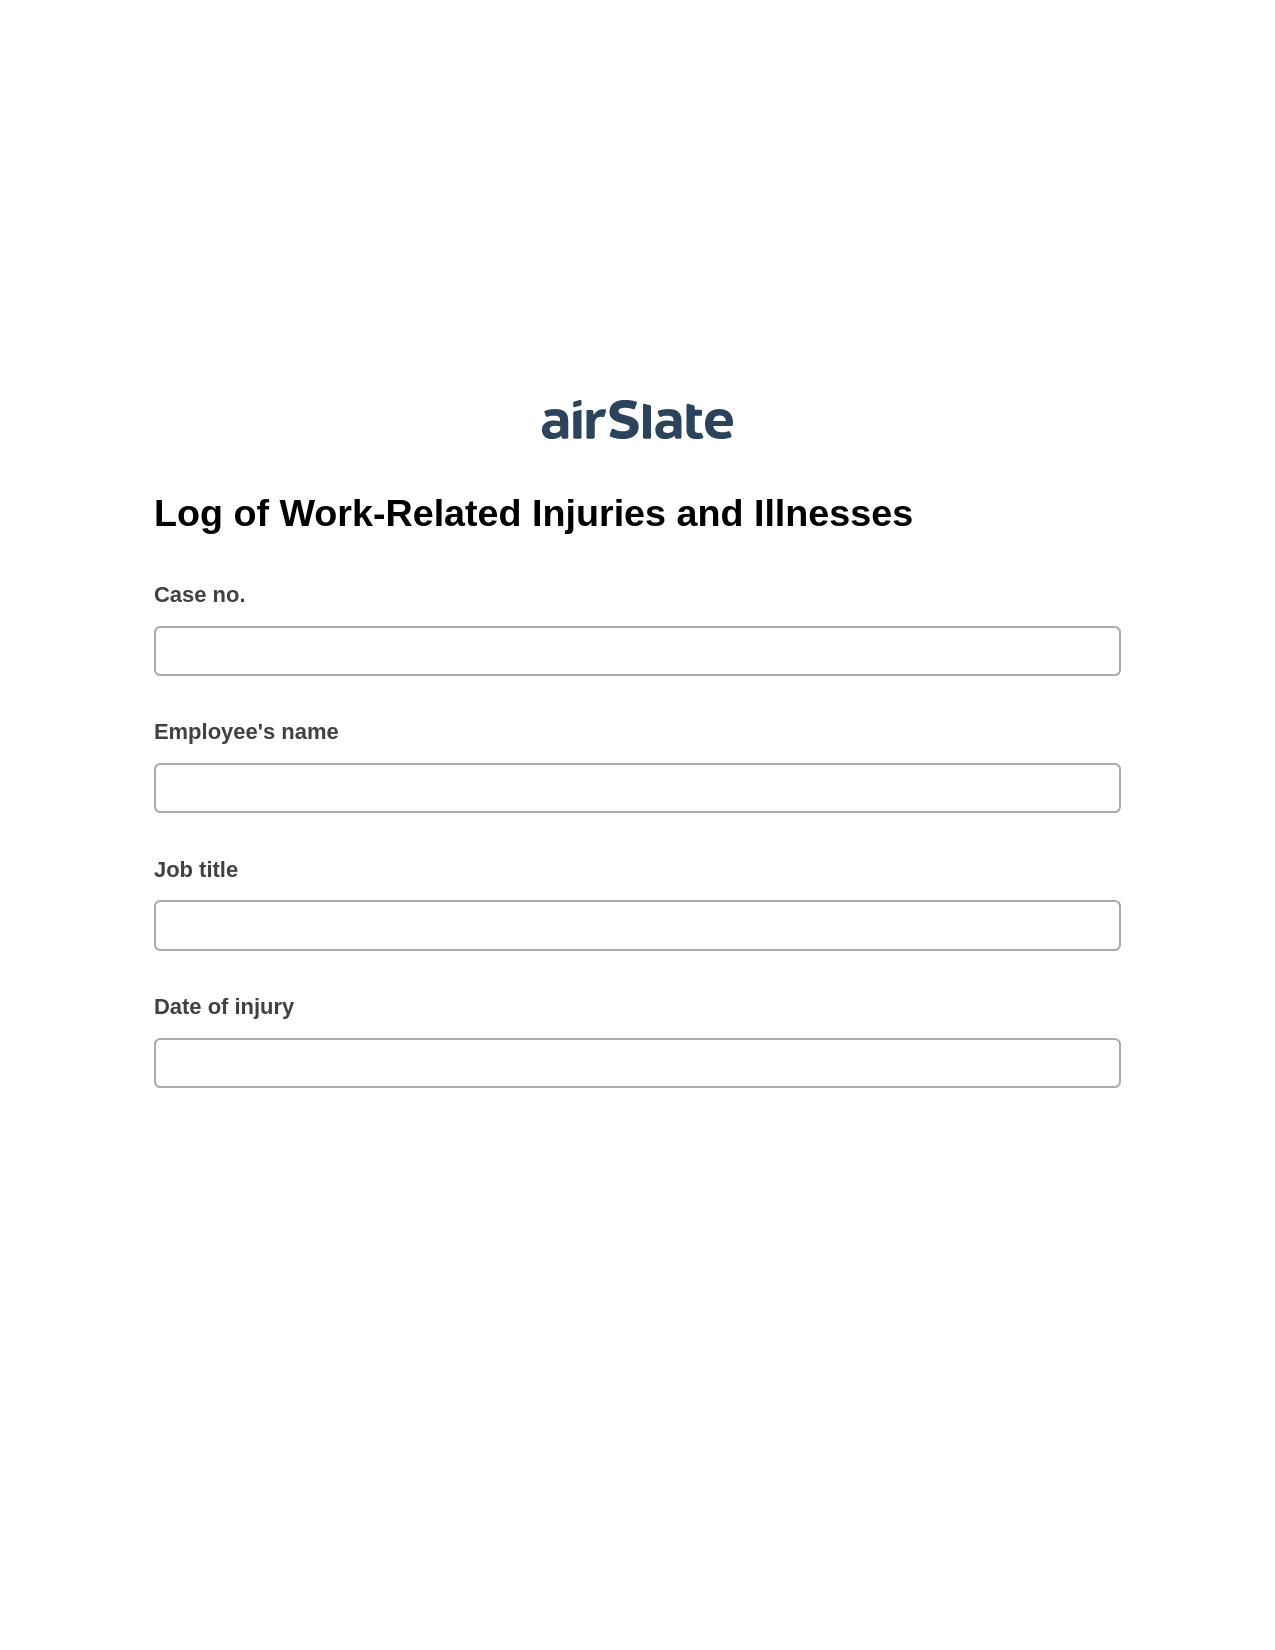 Multirole Log of Work-Related Injuries and Illnesses Pre-fill Slate from MS Dynamics 365 Records Bot, Create QuickBooks invoice Bot, Text Message Notification Postfinish Bot